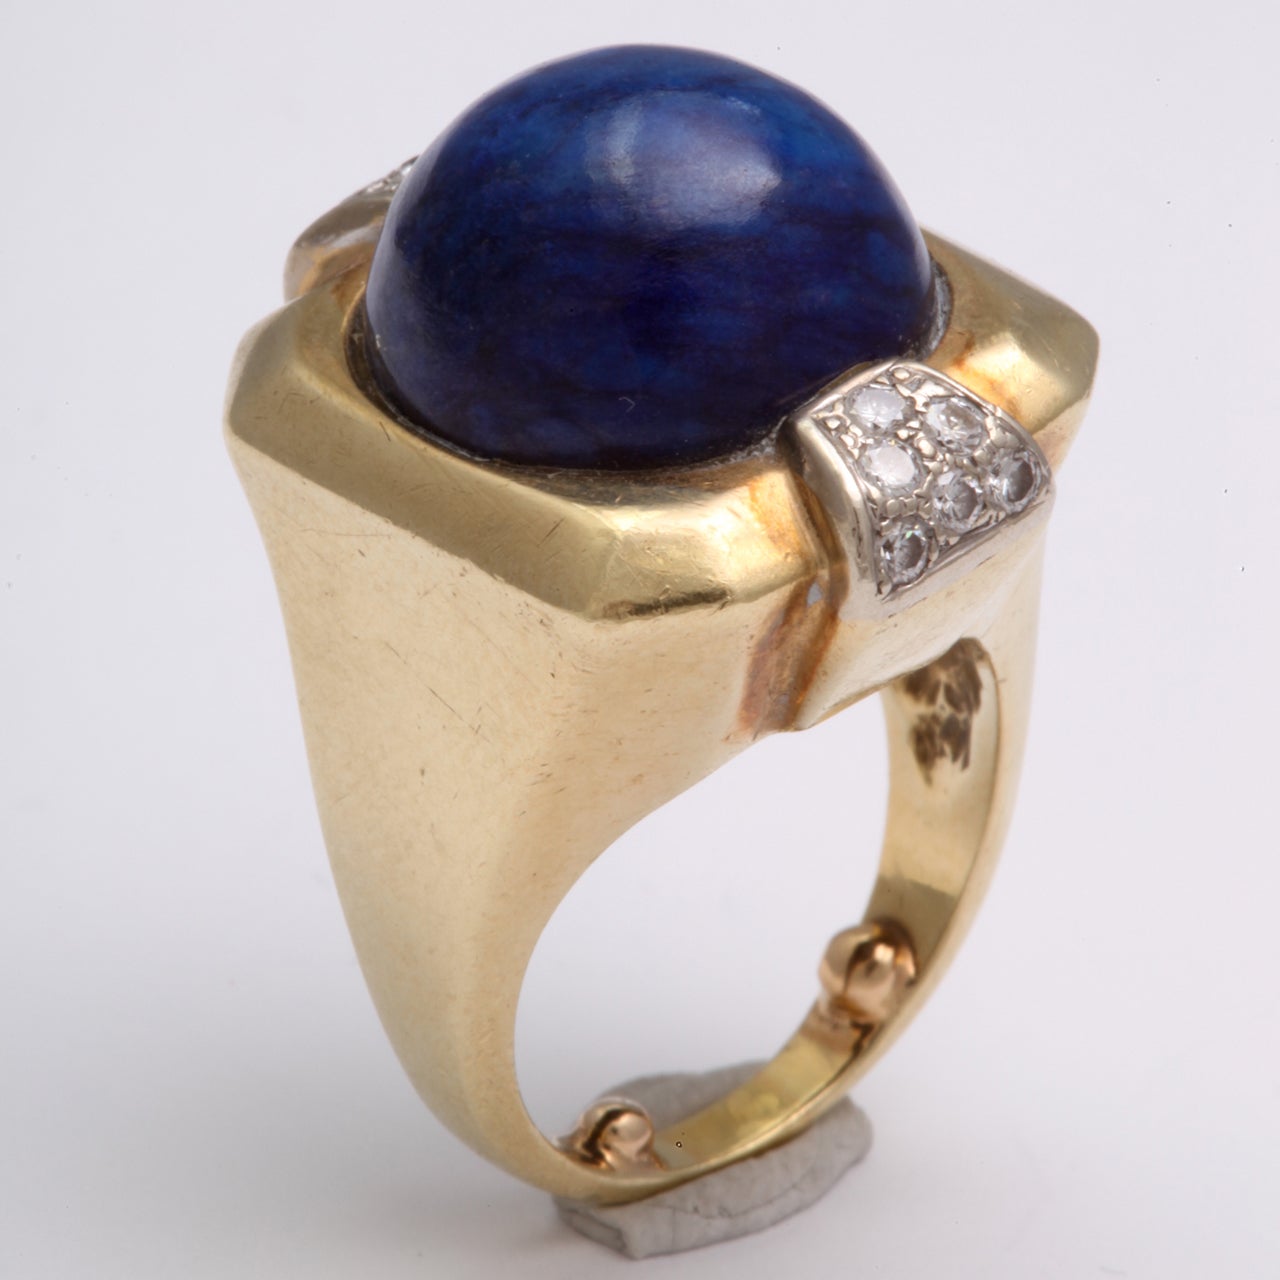 Oversize Lapis Ring with Diamond Accents